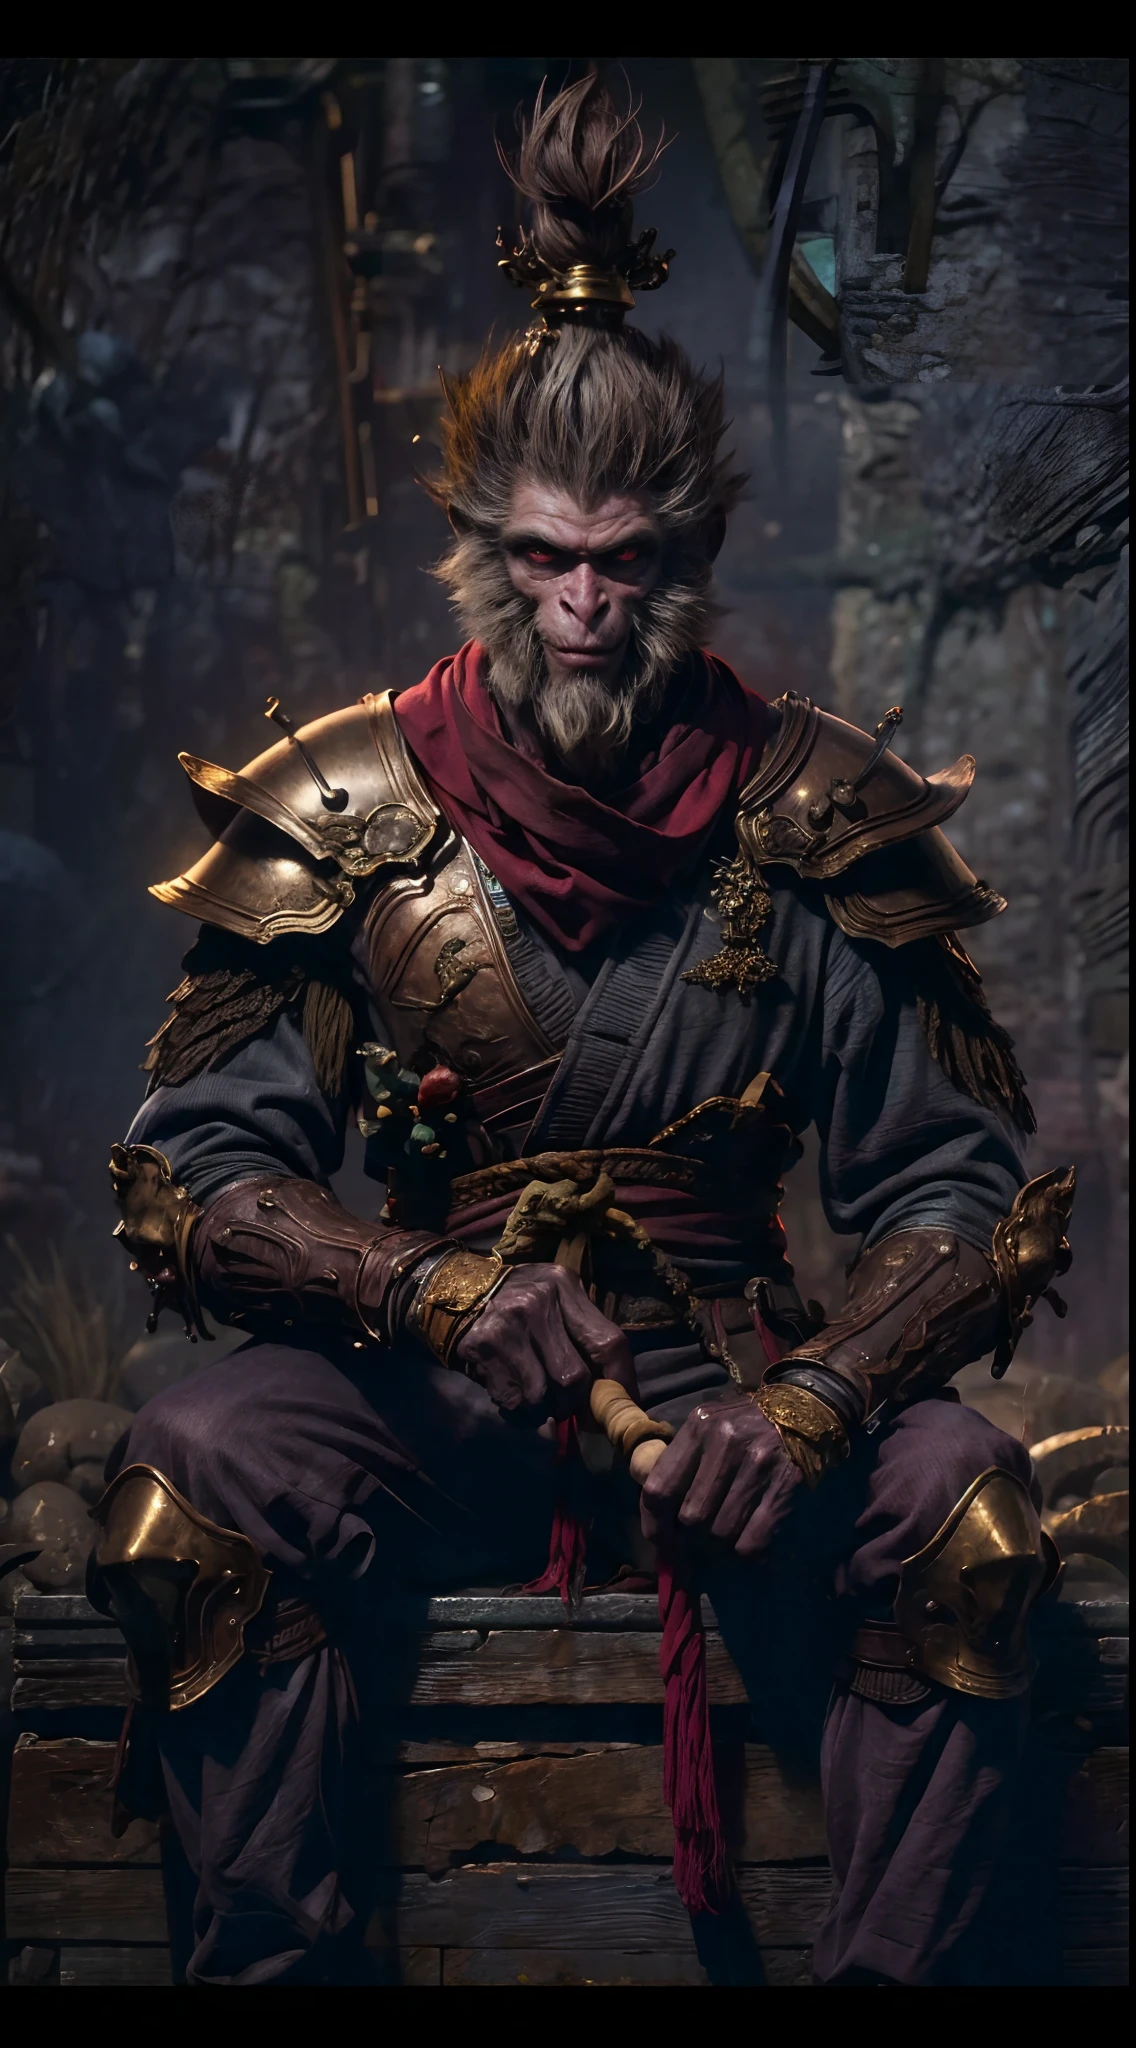 （irascible, irate，Qi Tian Great Sage，Monkey king，A high resolution, super-fine）, （Sharp-billed monkey gills）, Tour of the Dark West，pan（((Red glowing eyes))）looks into camera, evil look, Clear facial features, （Golden Hoop Curse）,On his shoulder hangs a long golden stick。, to grin, Monkey teeth exposed, Dressed in gorgeous armor, The red scarf sways in the wind，Monkey King's face, Shoulder armor youkai skeleton decoration, flame, Sit on Yokai Head Mountain, Kingly temperament, Full body photo, cinematic rim light, The light is delicate, tmasterpiece, ultra - detailed, Epic composition, super HD, high qulity, HighestQuali, 32K, grin, poison fangs